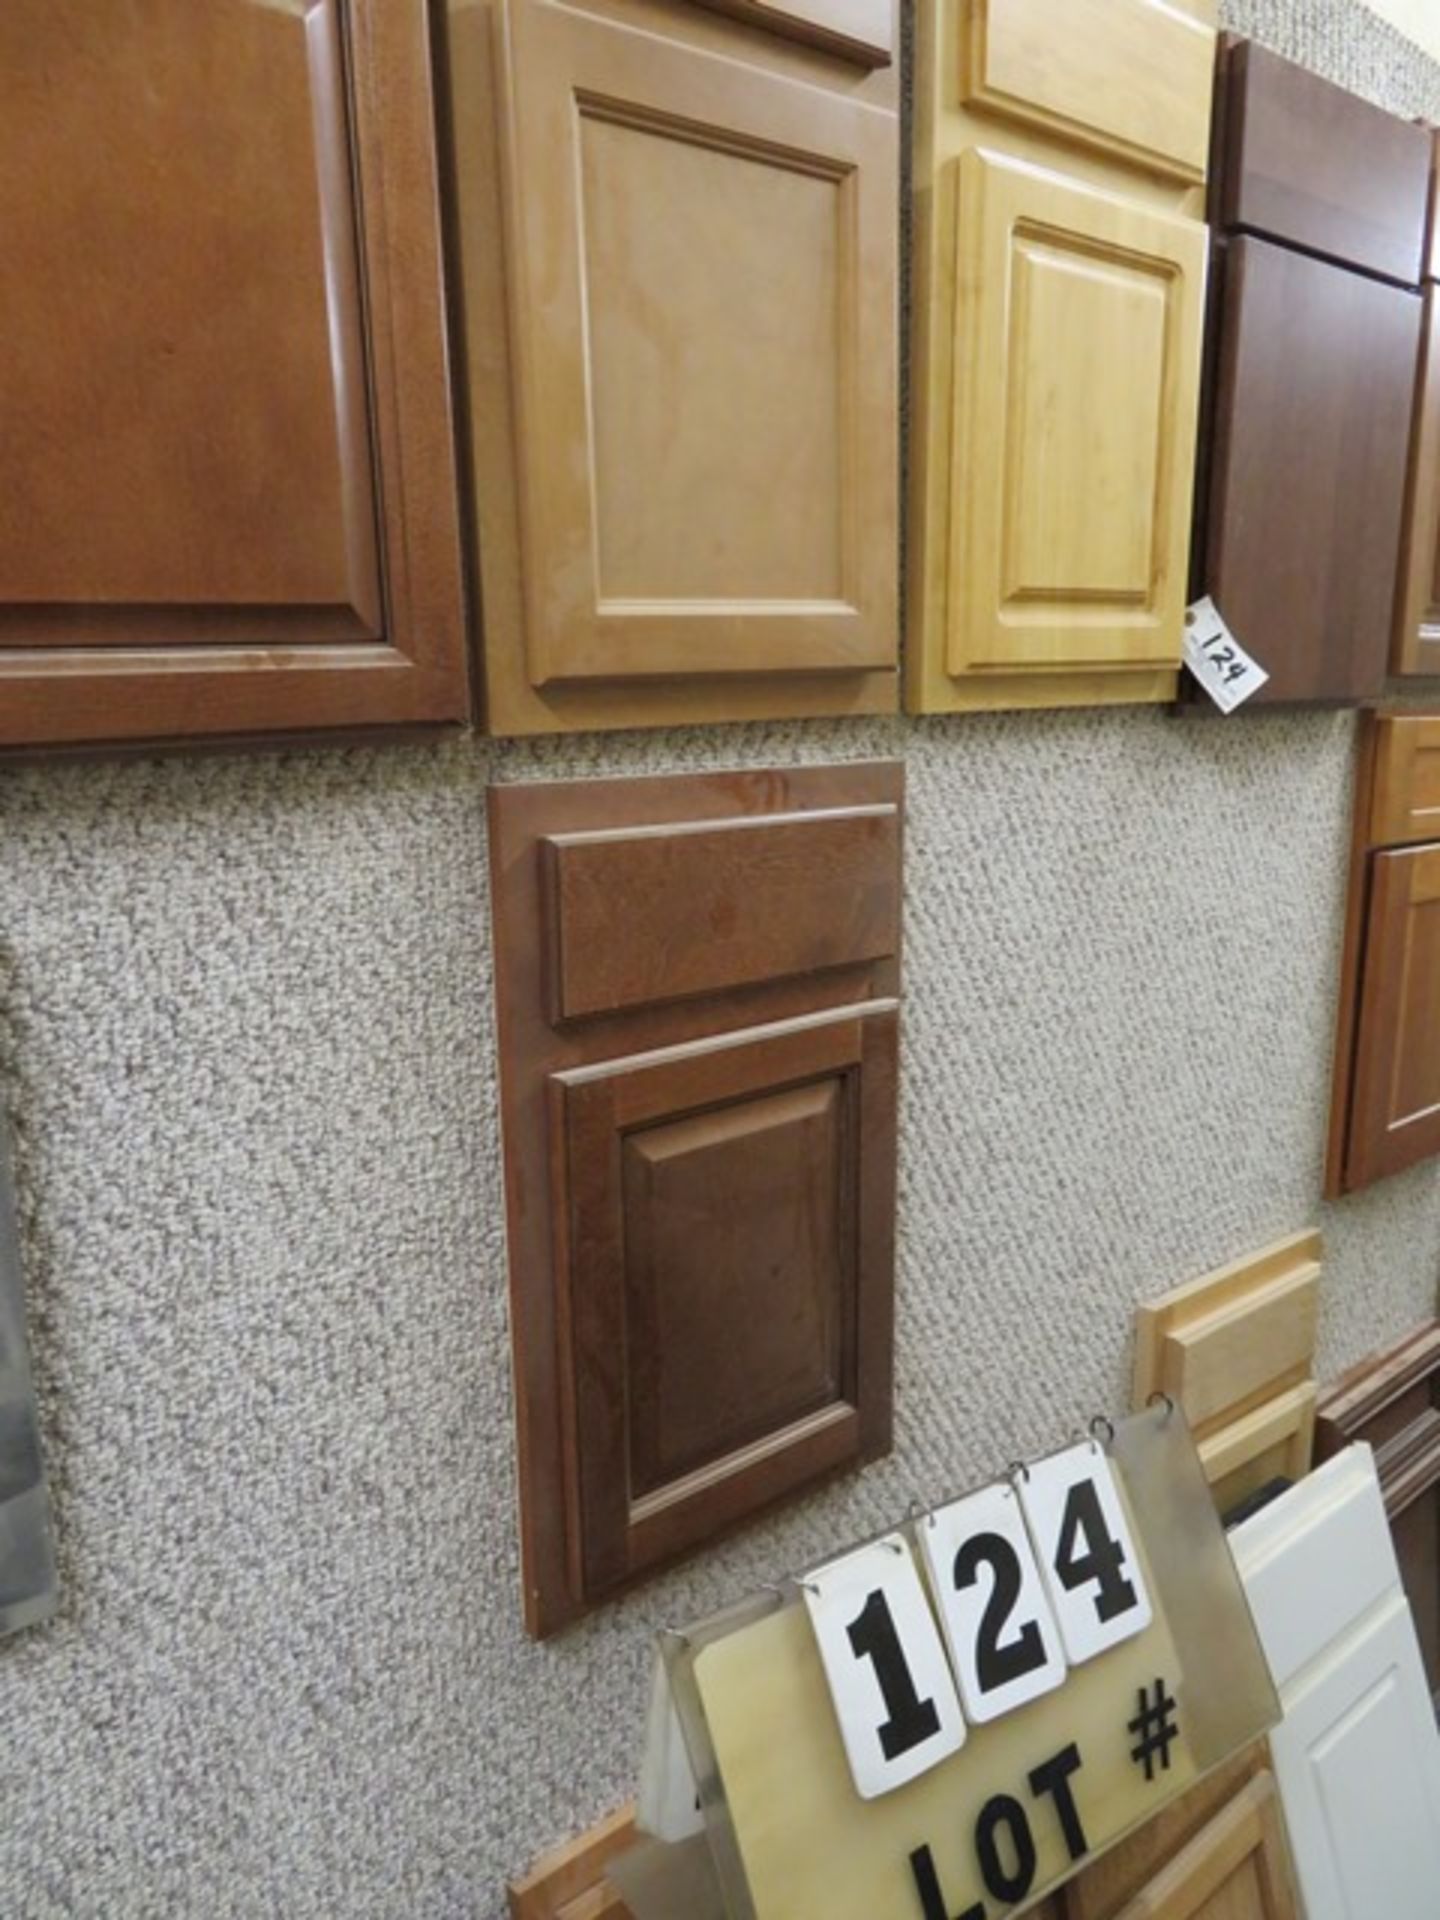 Lot of Cabinet Door Samples (On Both Sides of Wall & Inside Showroom)